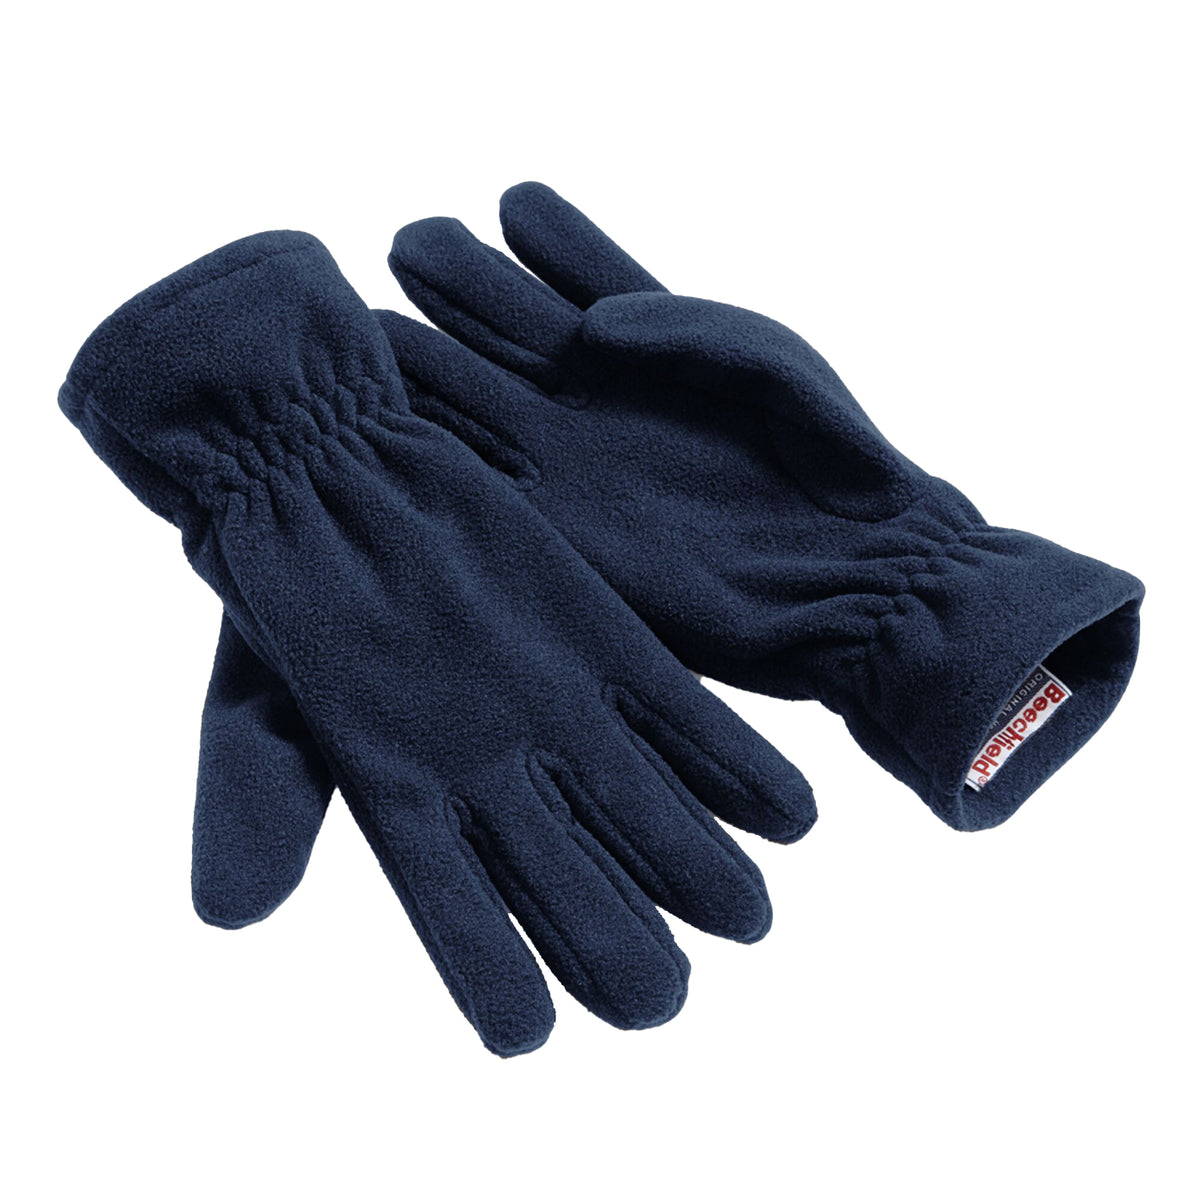 Heatguard Mens Thinsulate Touchscreen Leather Gloves 